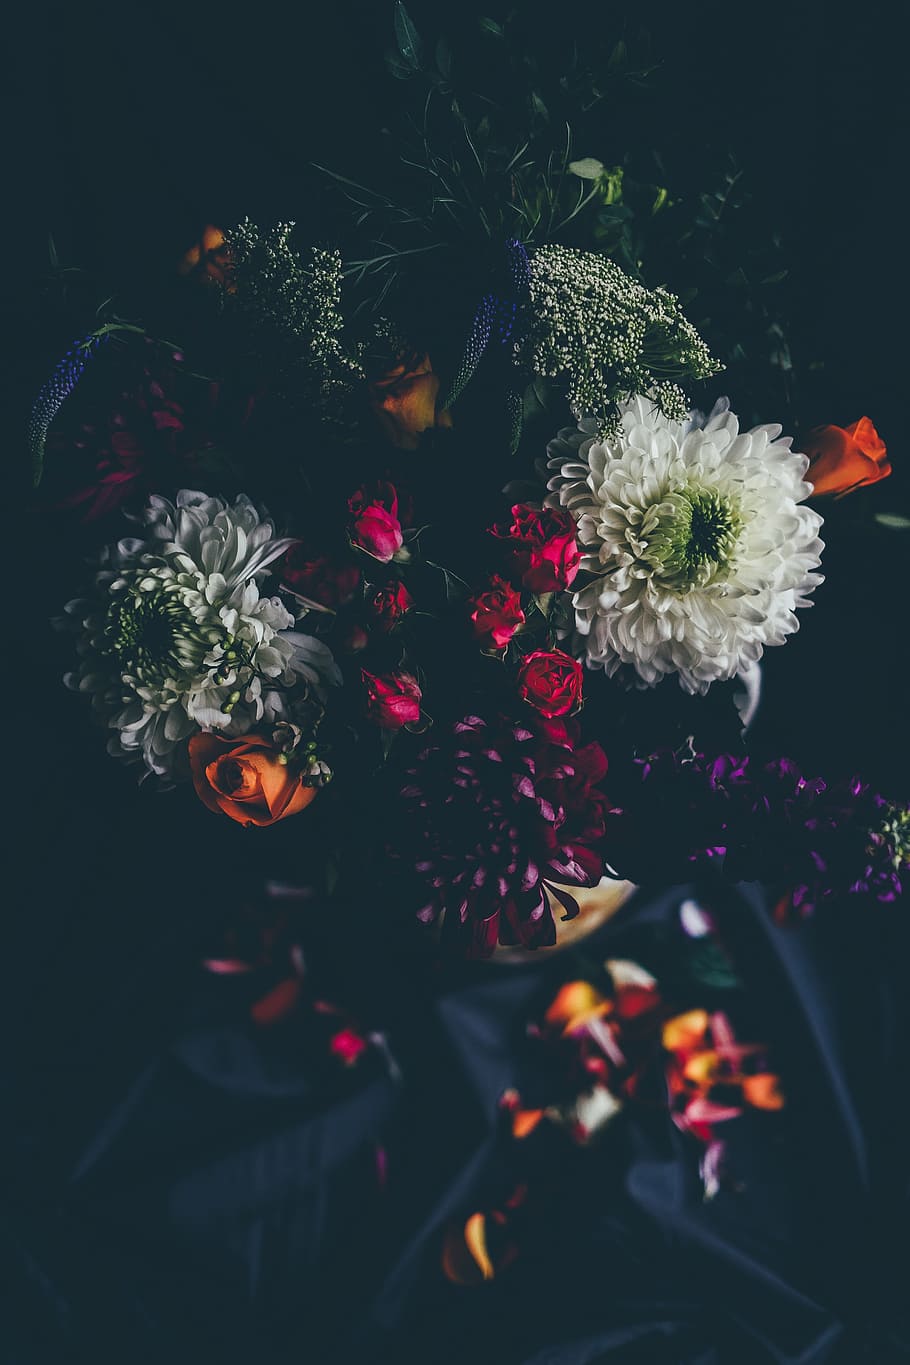 photo of variety of flowers, nature, blossom, blur, bokeh, black